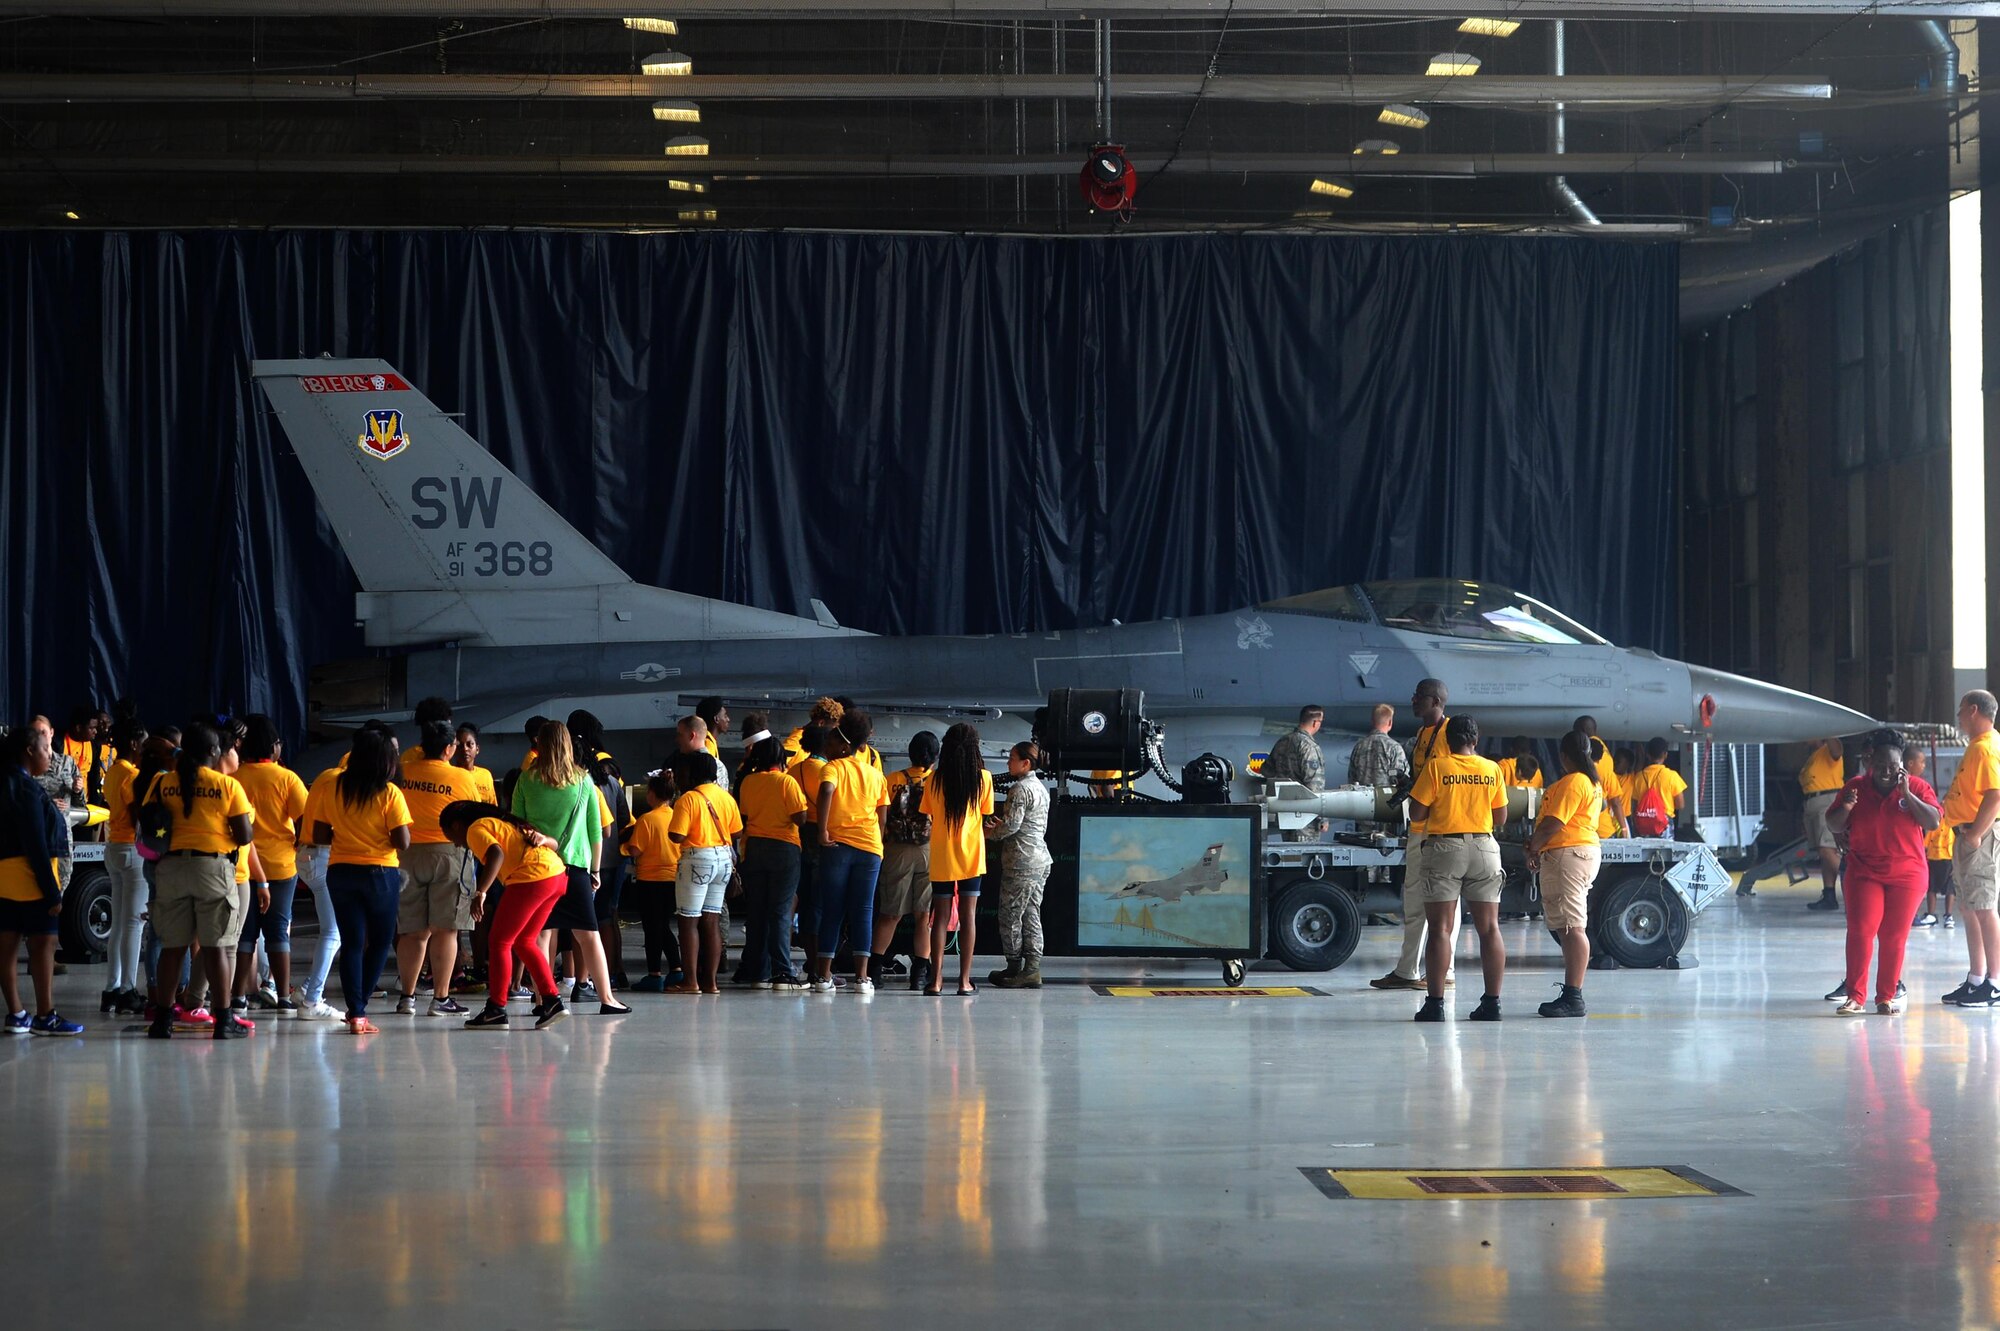 Attendees of the Sumter County Sheriff’s Office’s annual youth conference are briefed about the capabilities of the F-16CM Fighting Falcon at Shaw Air Force Base, S.C., June 16, 2017. During the conference, attendees safely interacted with a M61A1 Vulcan 20 mm rotary cannon, inert bombs and other 20th Fighter Wing weapons and equipment. (U.S. Air Force photo by Airman 1st Class Christopher Maldonado)